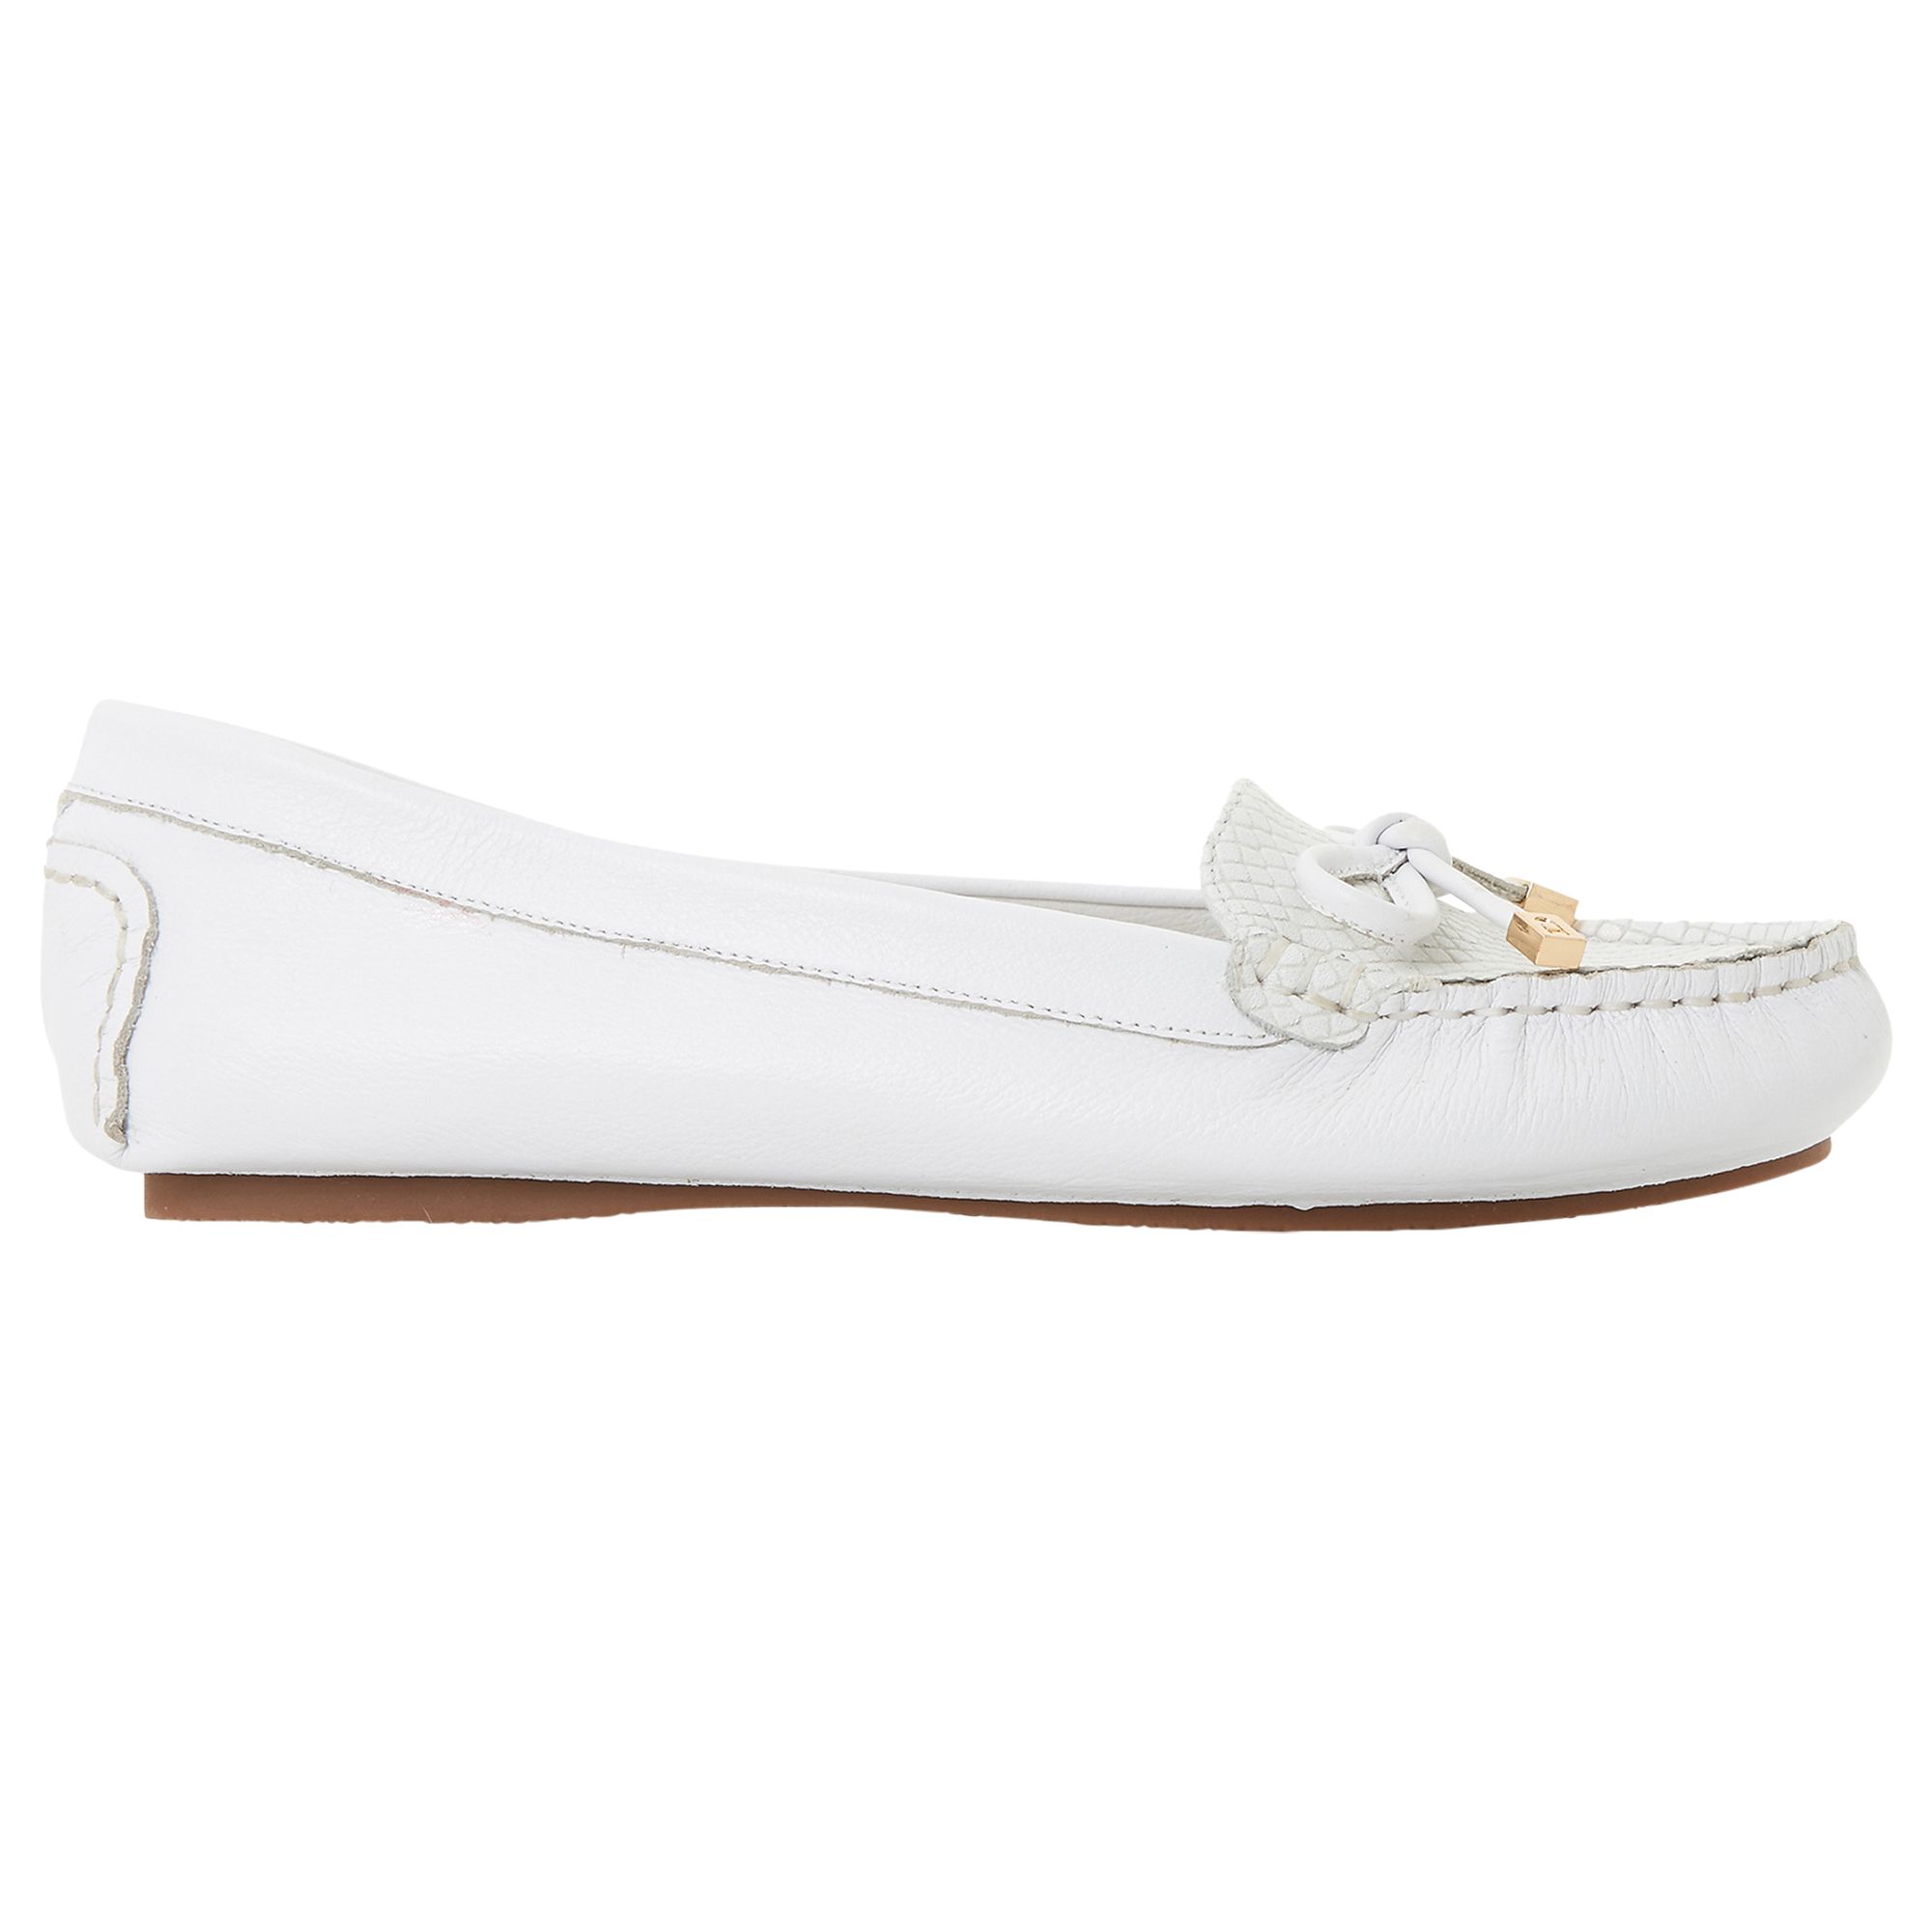 Dune Geenova Leather Loafers, White Leather